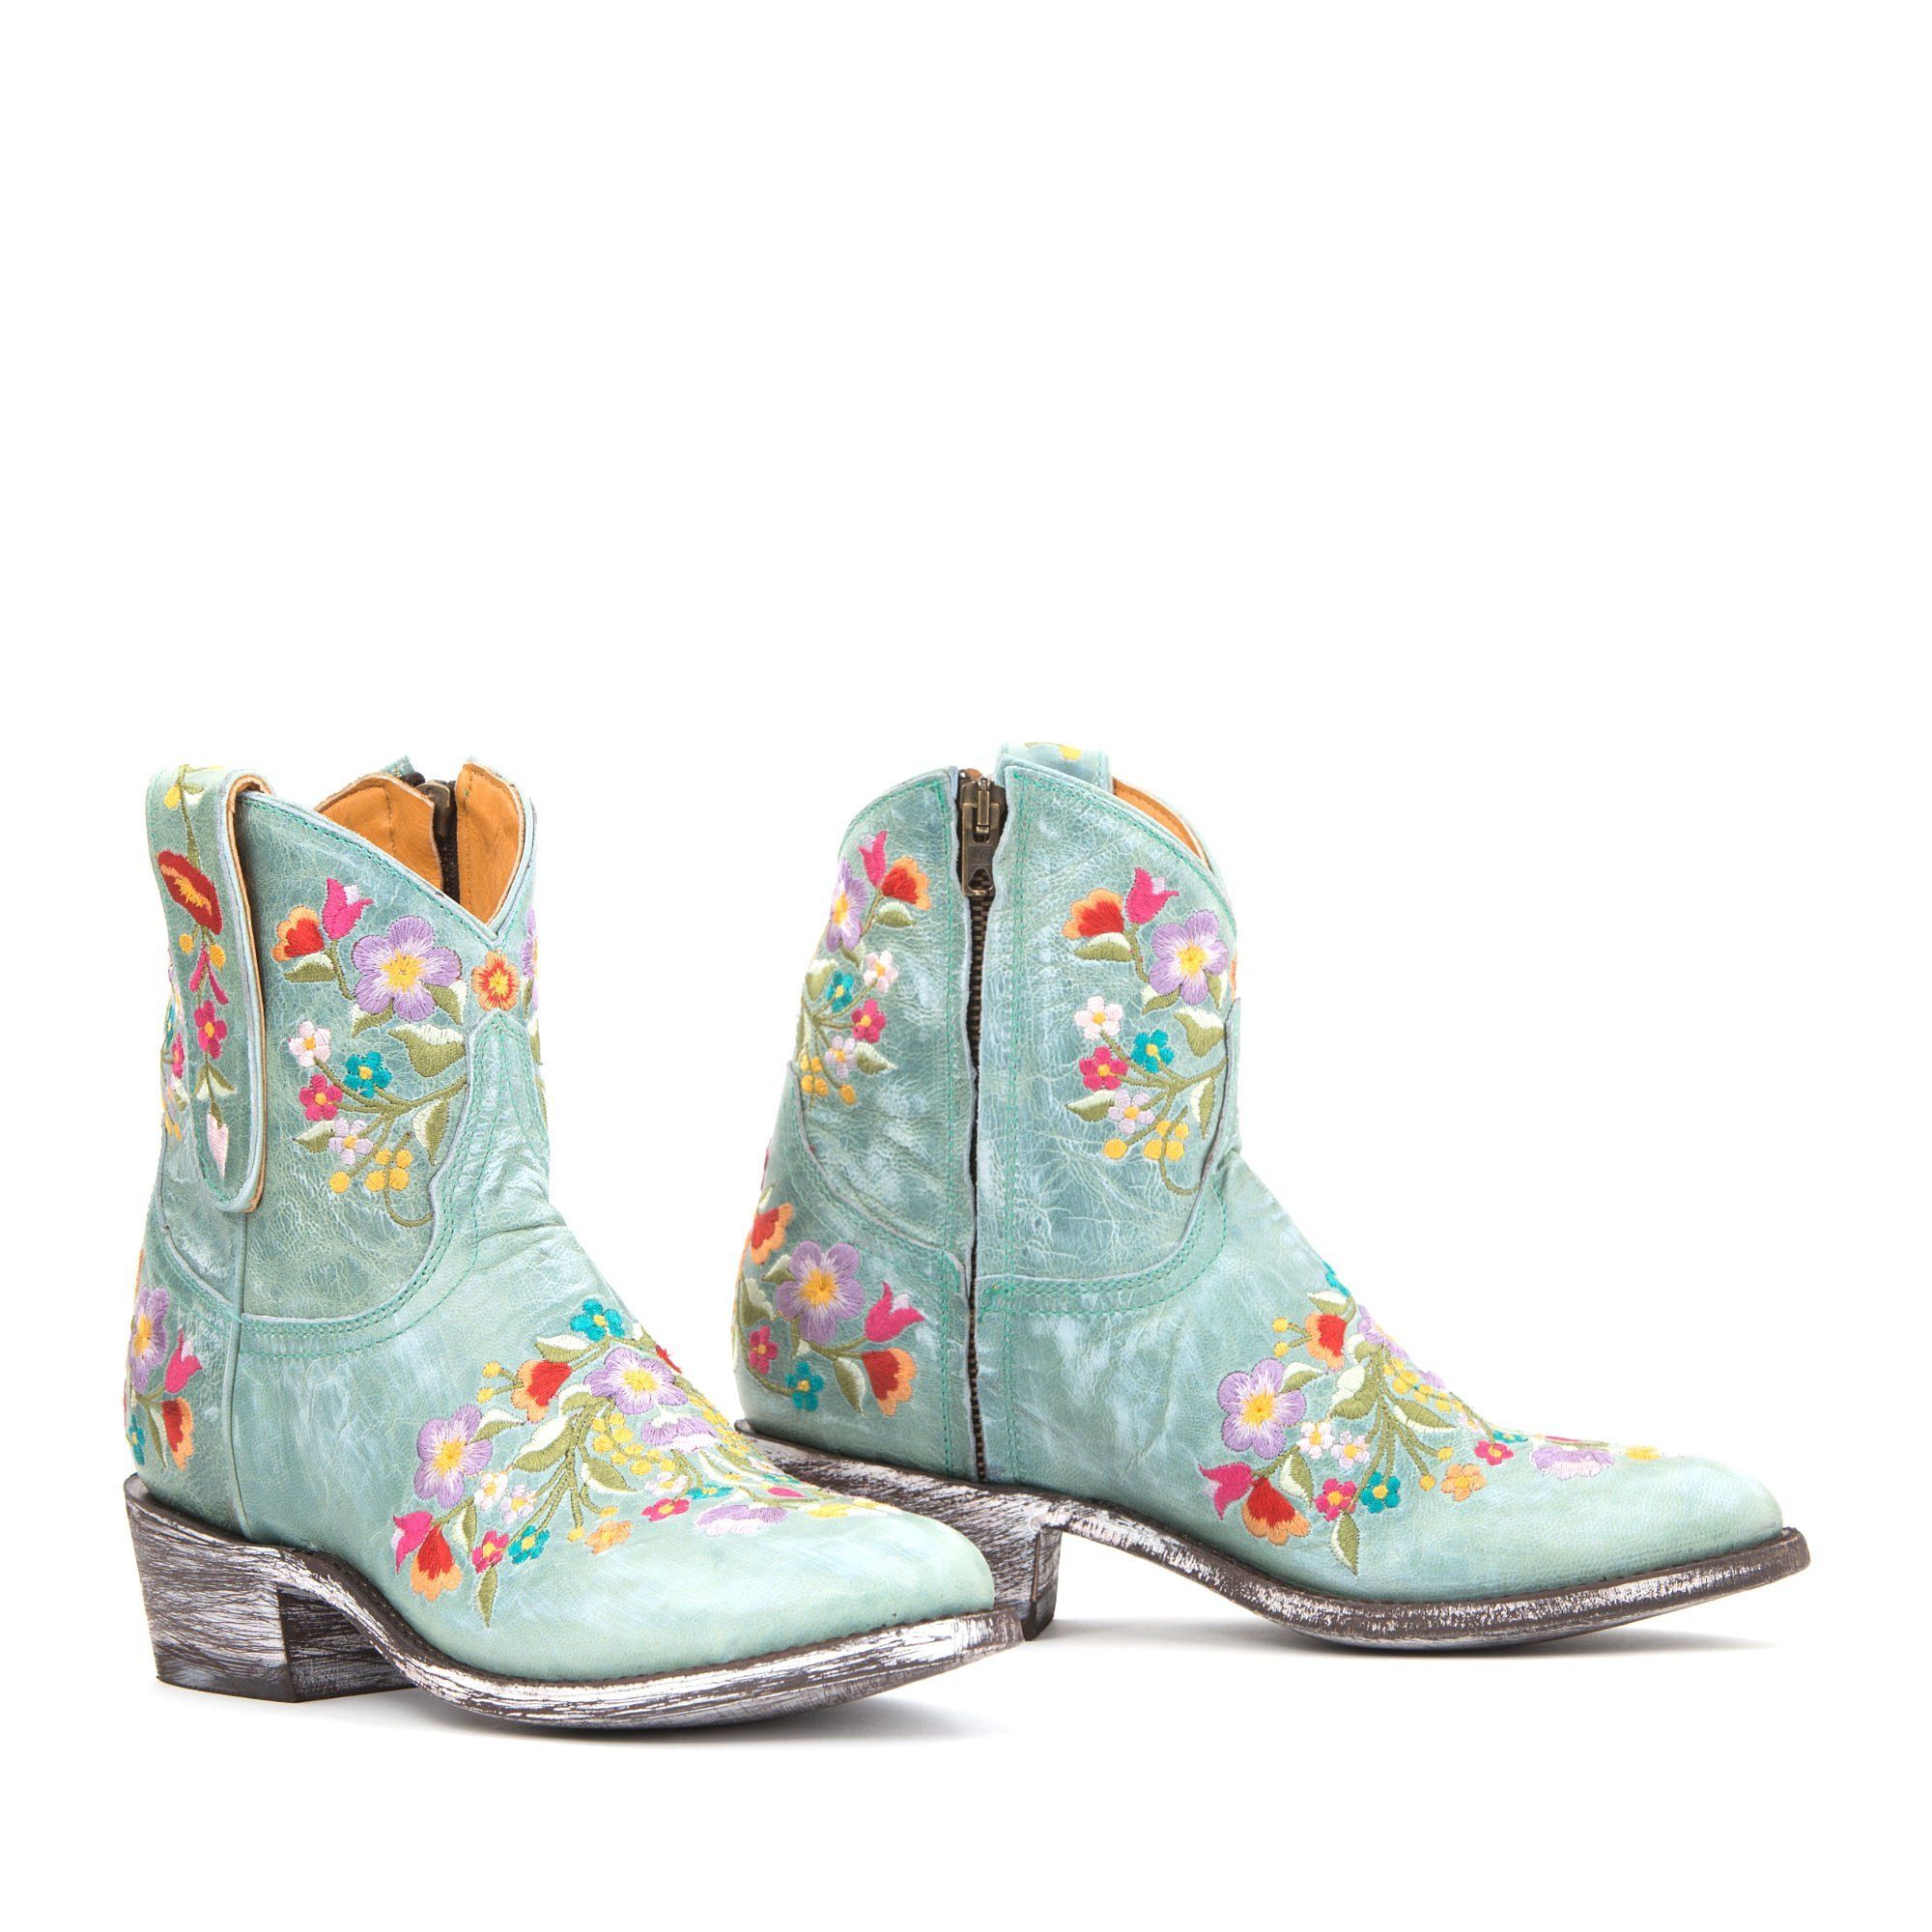 SORAZIPPER 7'' Aqua ROUNDED TOE ANKLE BOOTS WITH FLOWER STITCHING  AND SIDE ZIP CLOSURE  Total heel height 1.8 Inches  100% cow 